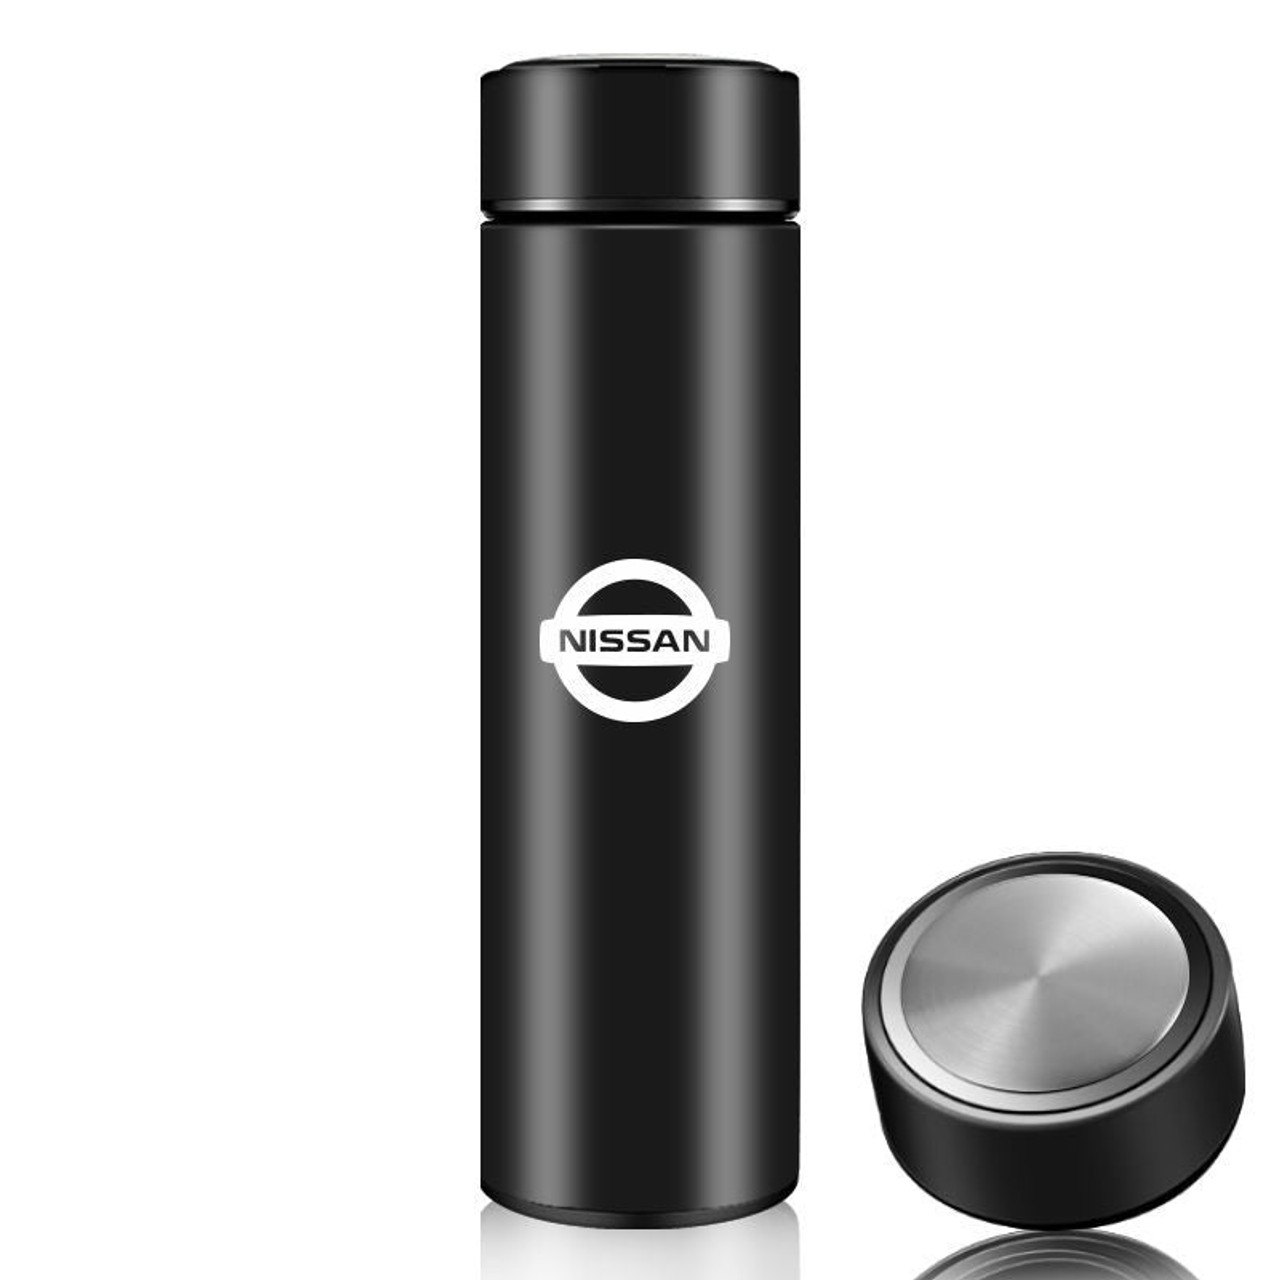 NEW THERMOS NISSAN FBB750P6 25.6-OZ STAINLESS STEEL VACUUM INSULATED  COMPACT BOTTLE,  price tracker / tracking,  price history  charts,  price watches,  price drop alerts